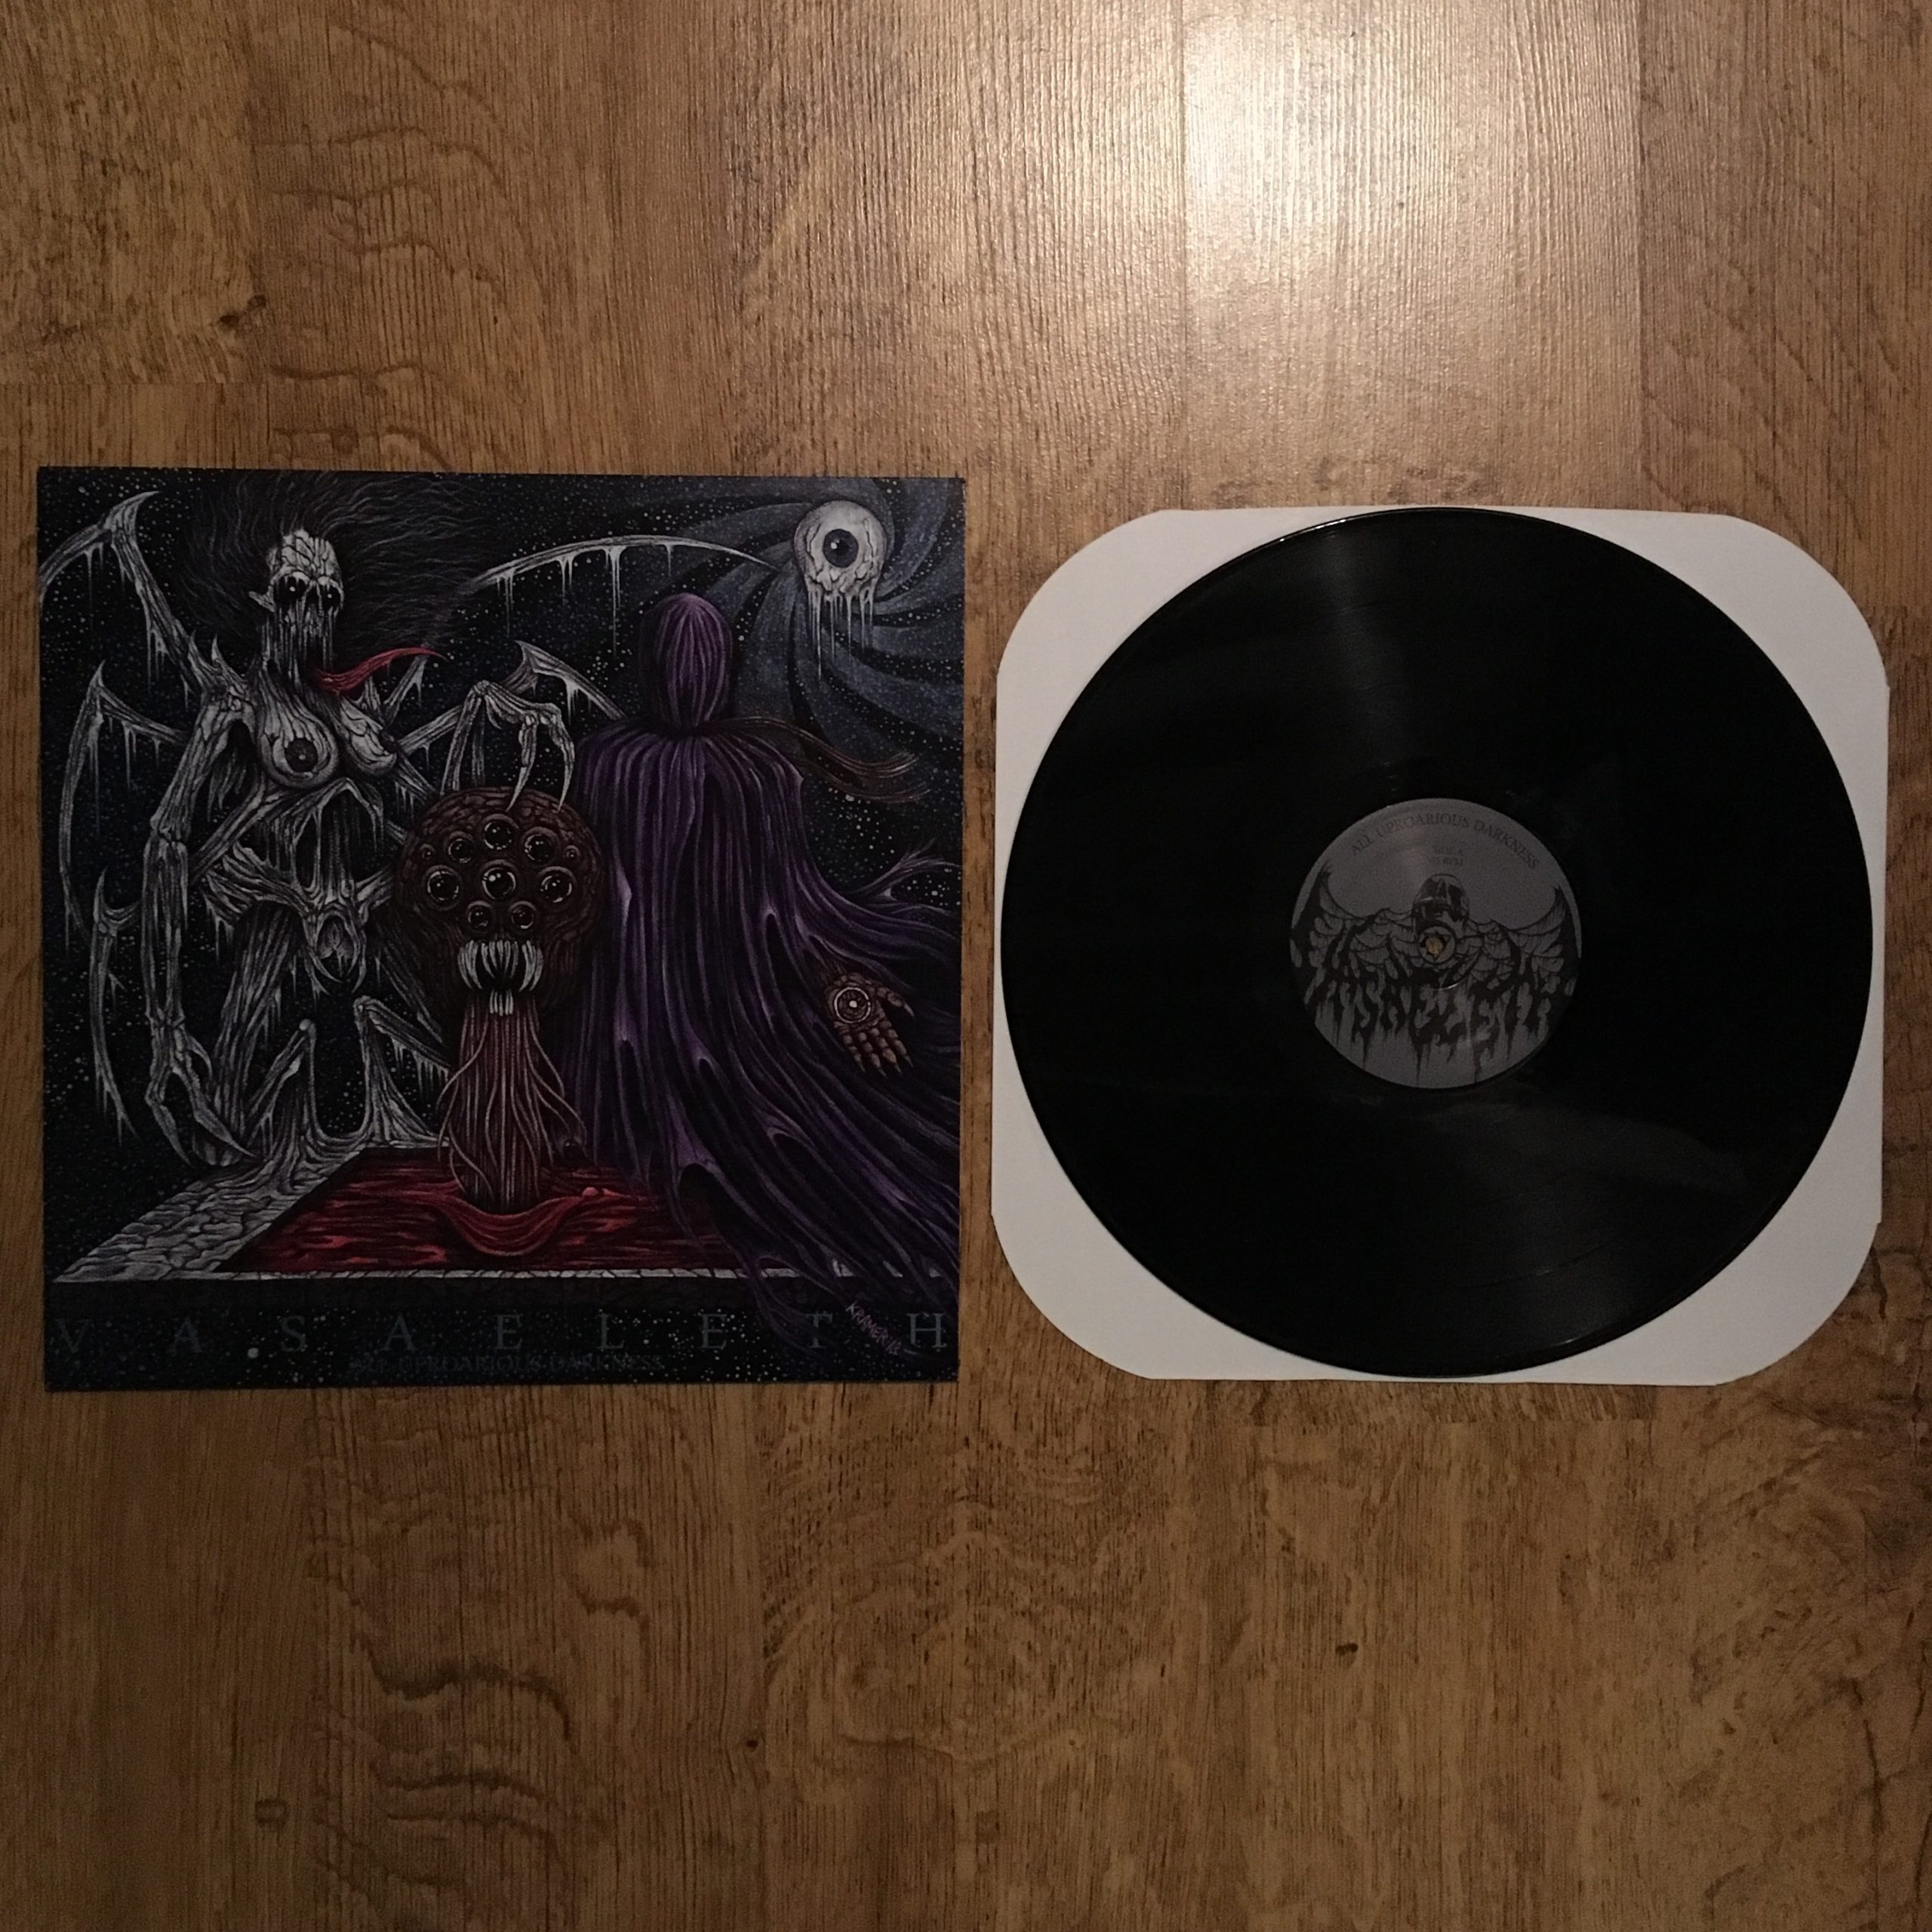 Photo of the Vasaeleth - "All Uproarious Darkness" LP (black vinyl)